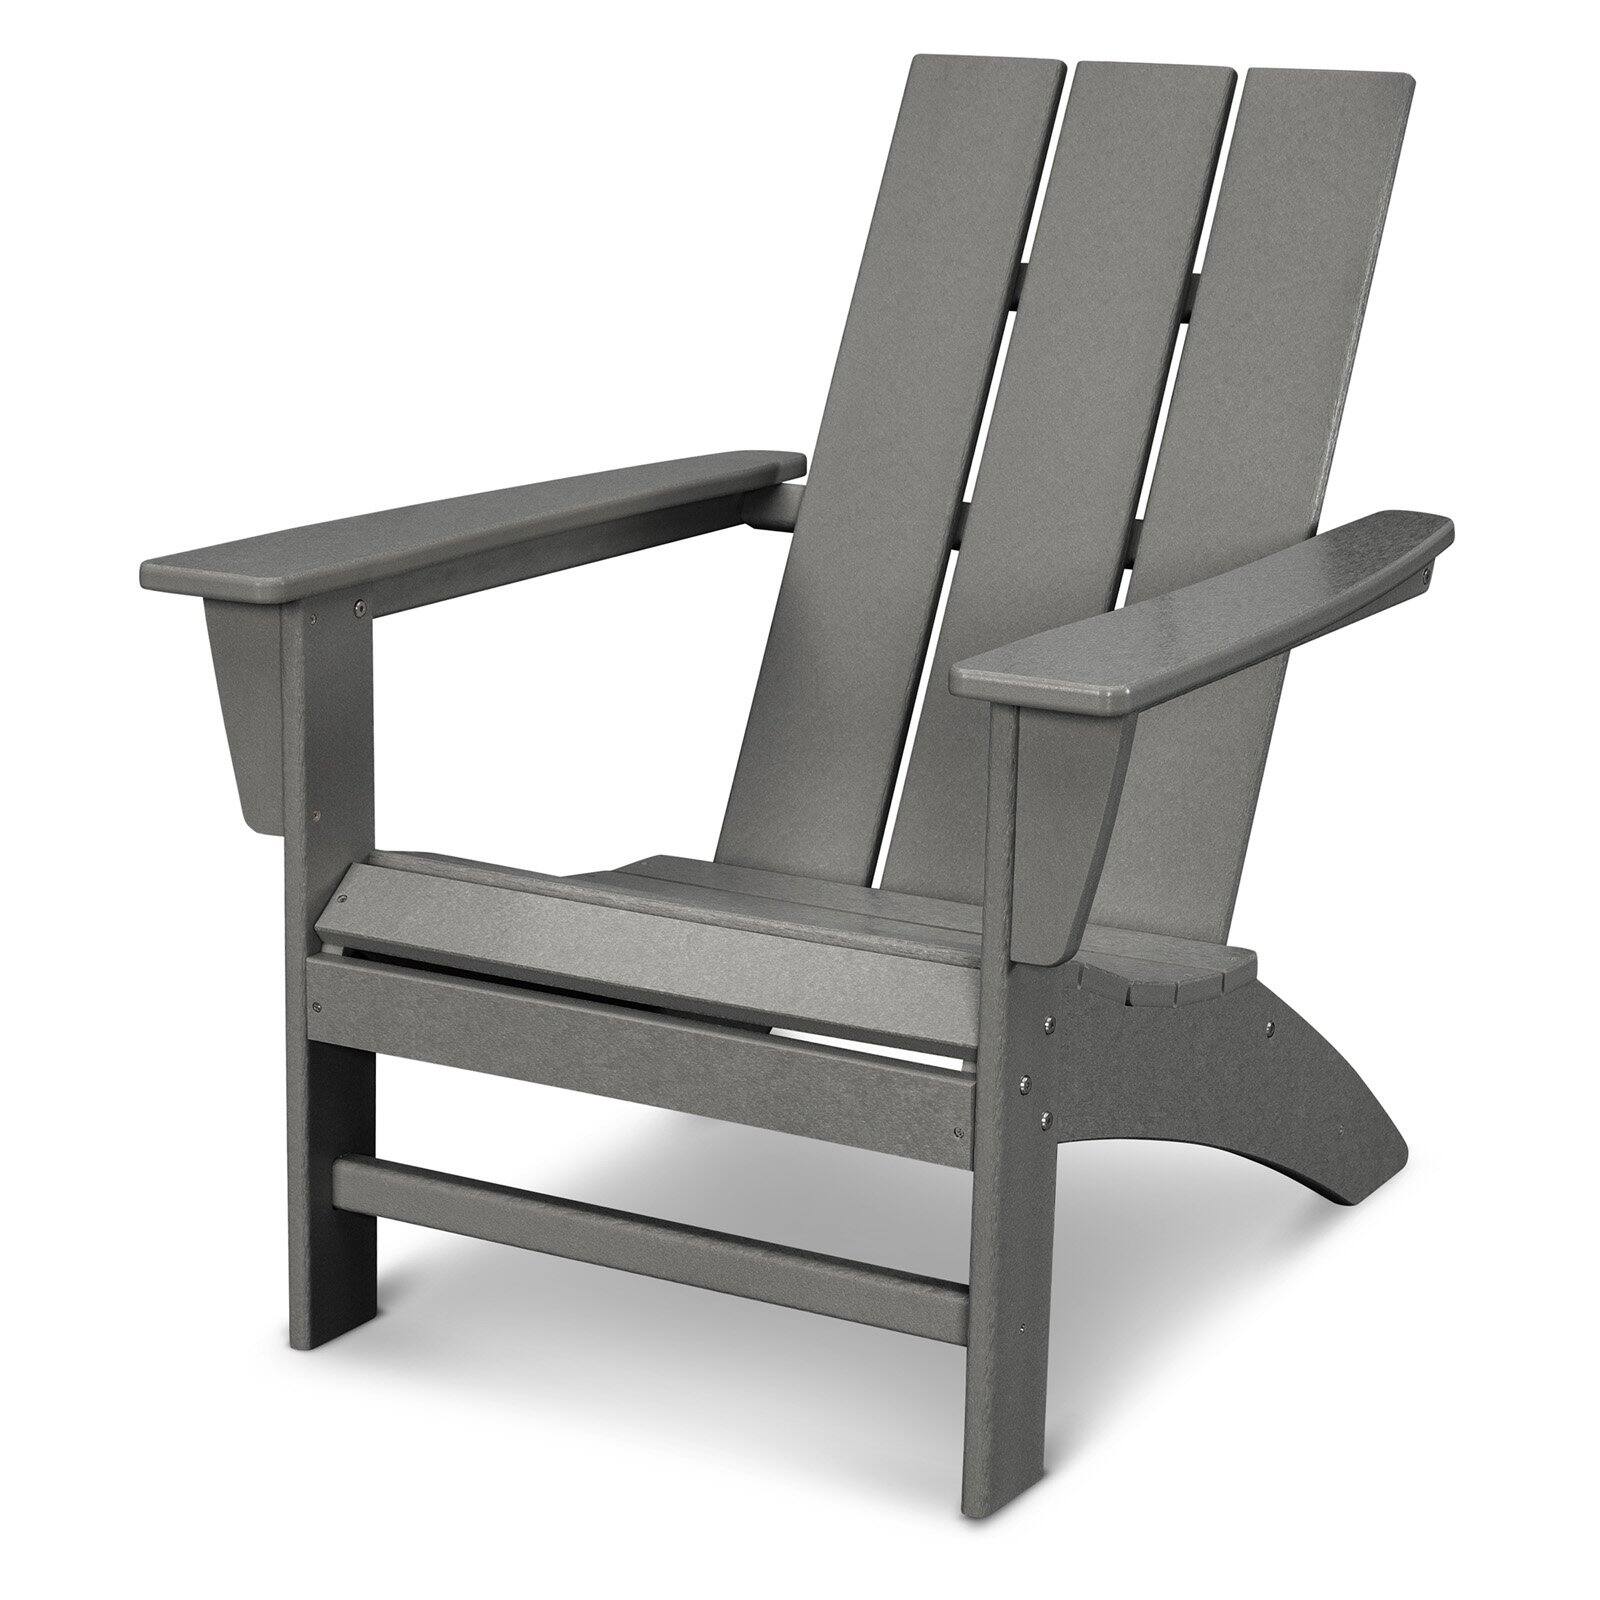 POLYWOODÂ® Modern Outdoor Adirondack Chair - image 2 of 4